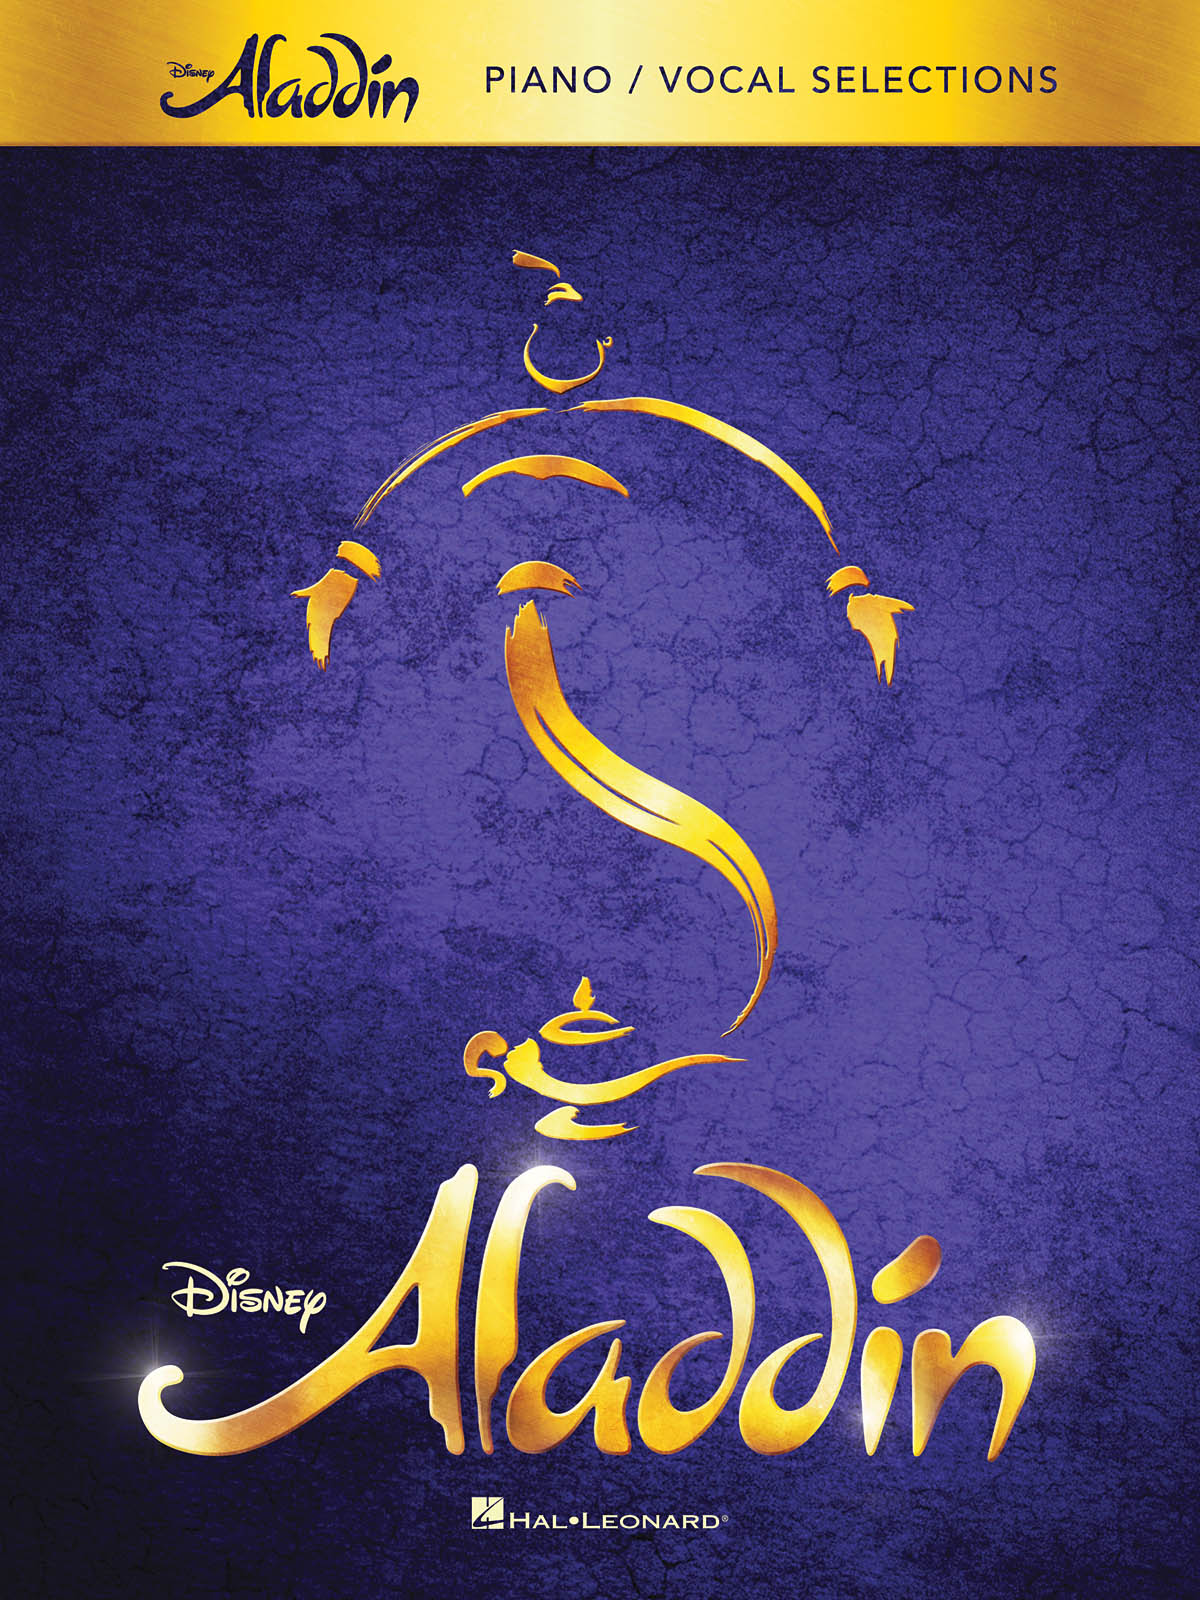 Aladdin ? Broadway Musical Vocal Selections - Vocal Selections Piano, Vocal and Guitar